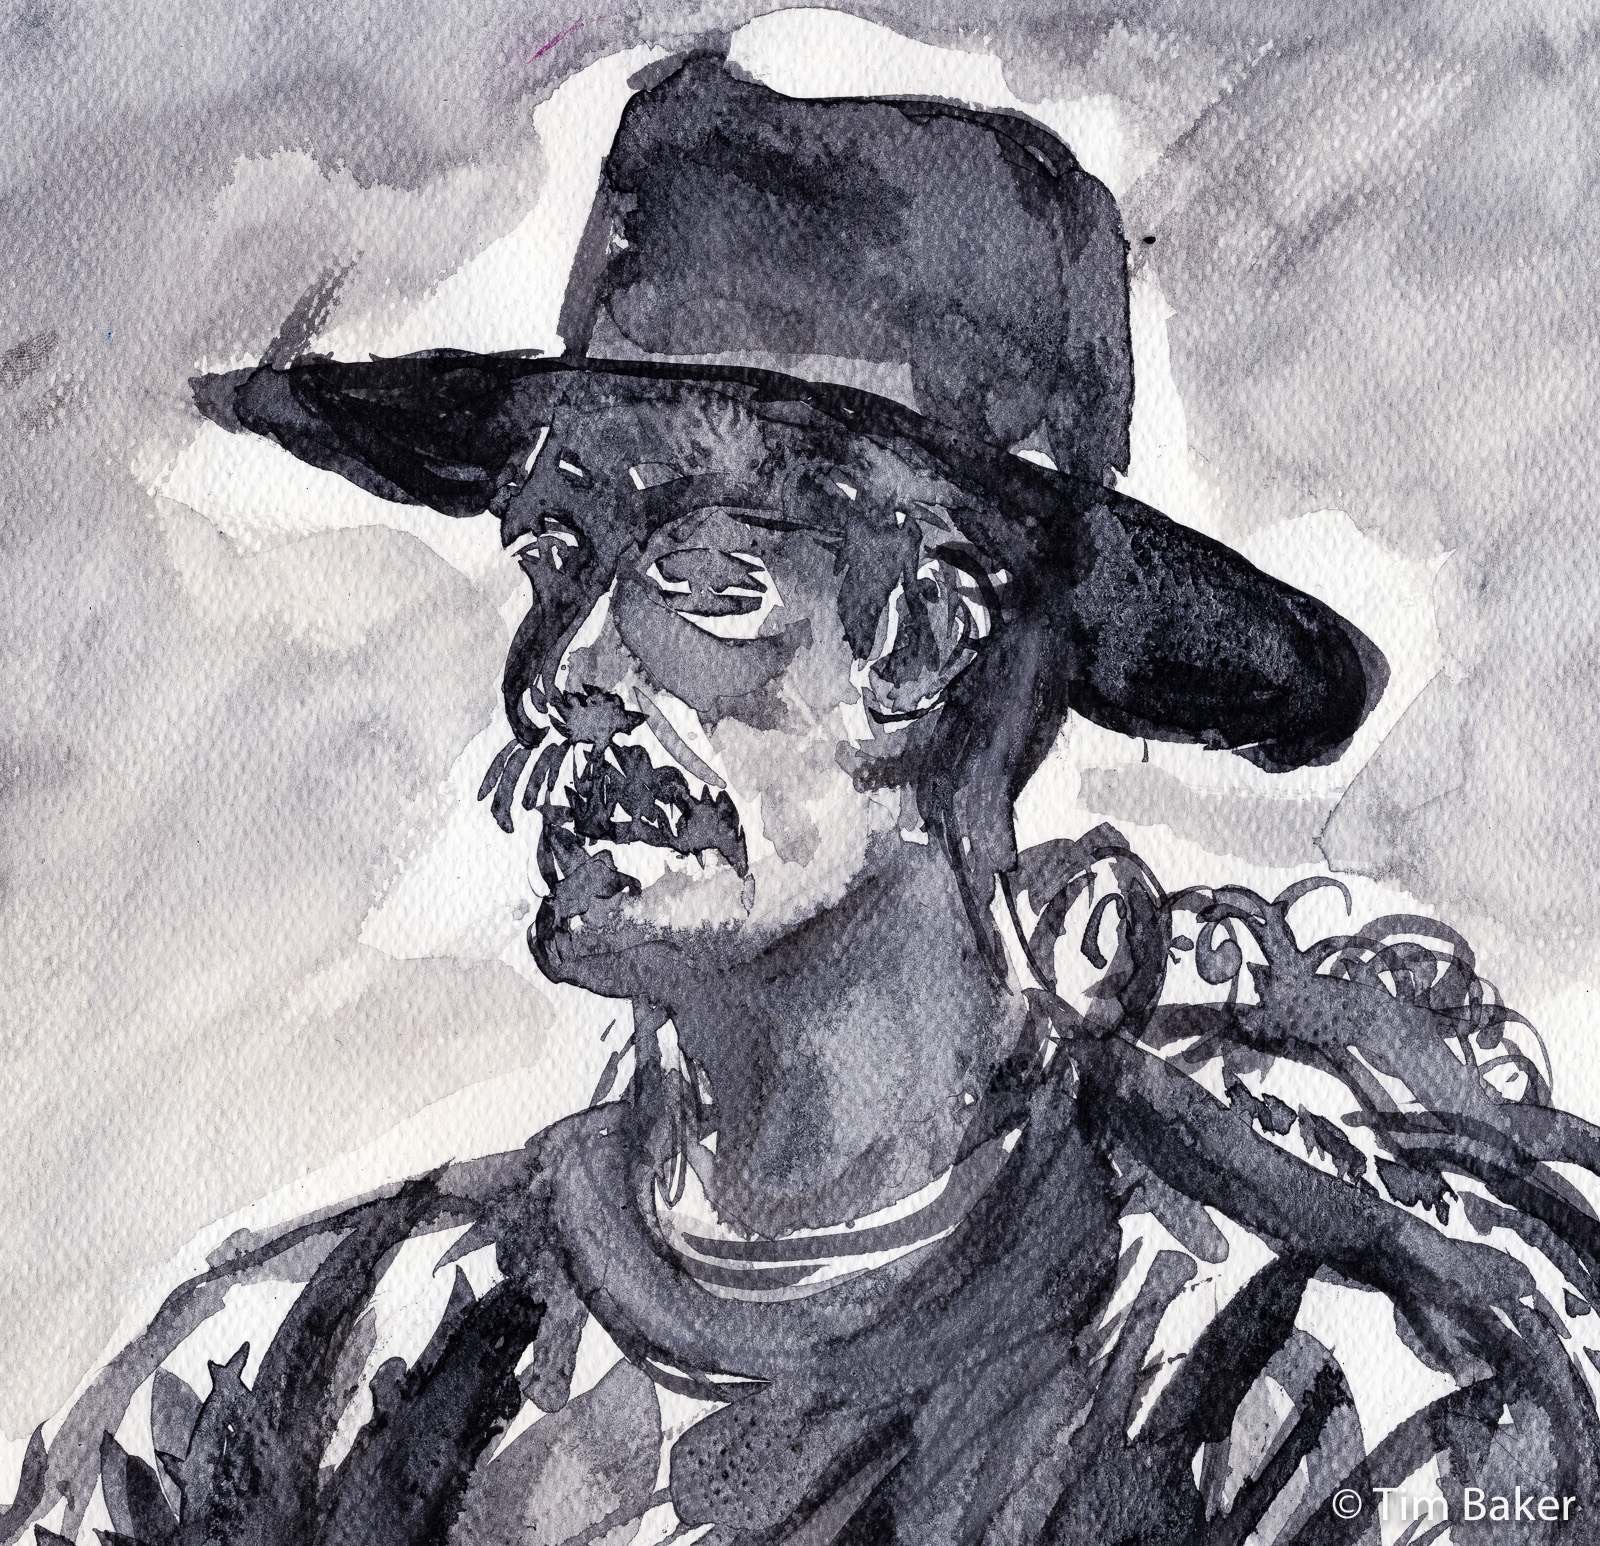 Mike (detail), Portraits At The Pub, Brush and ink, A3 Daler Rowney Watercolour Paper.